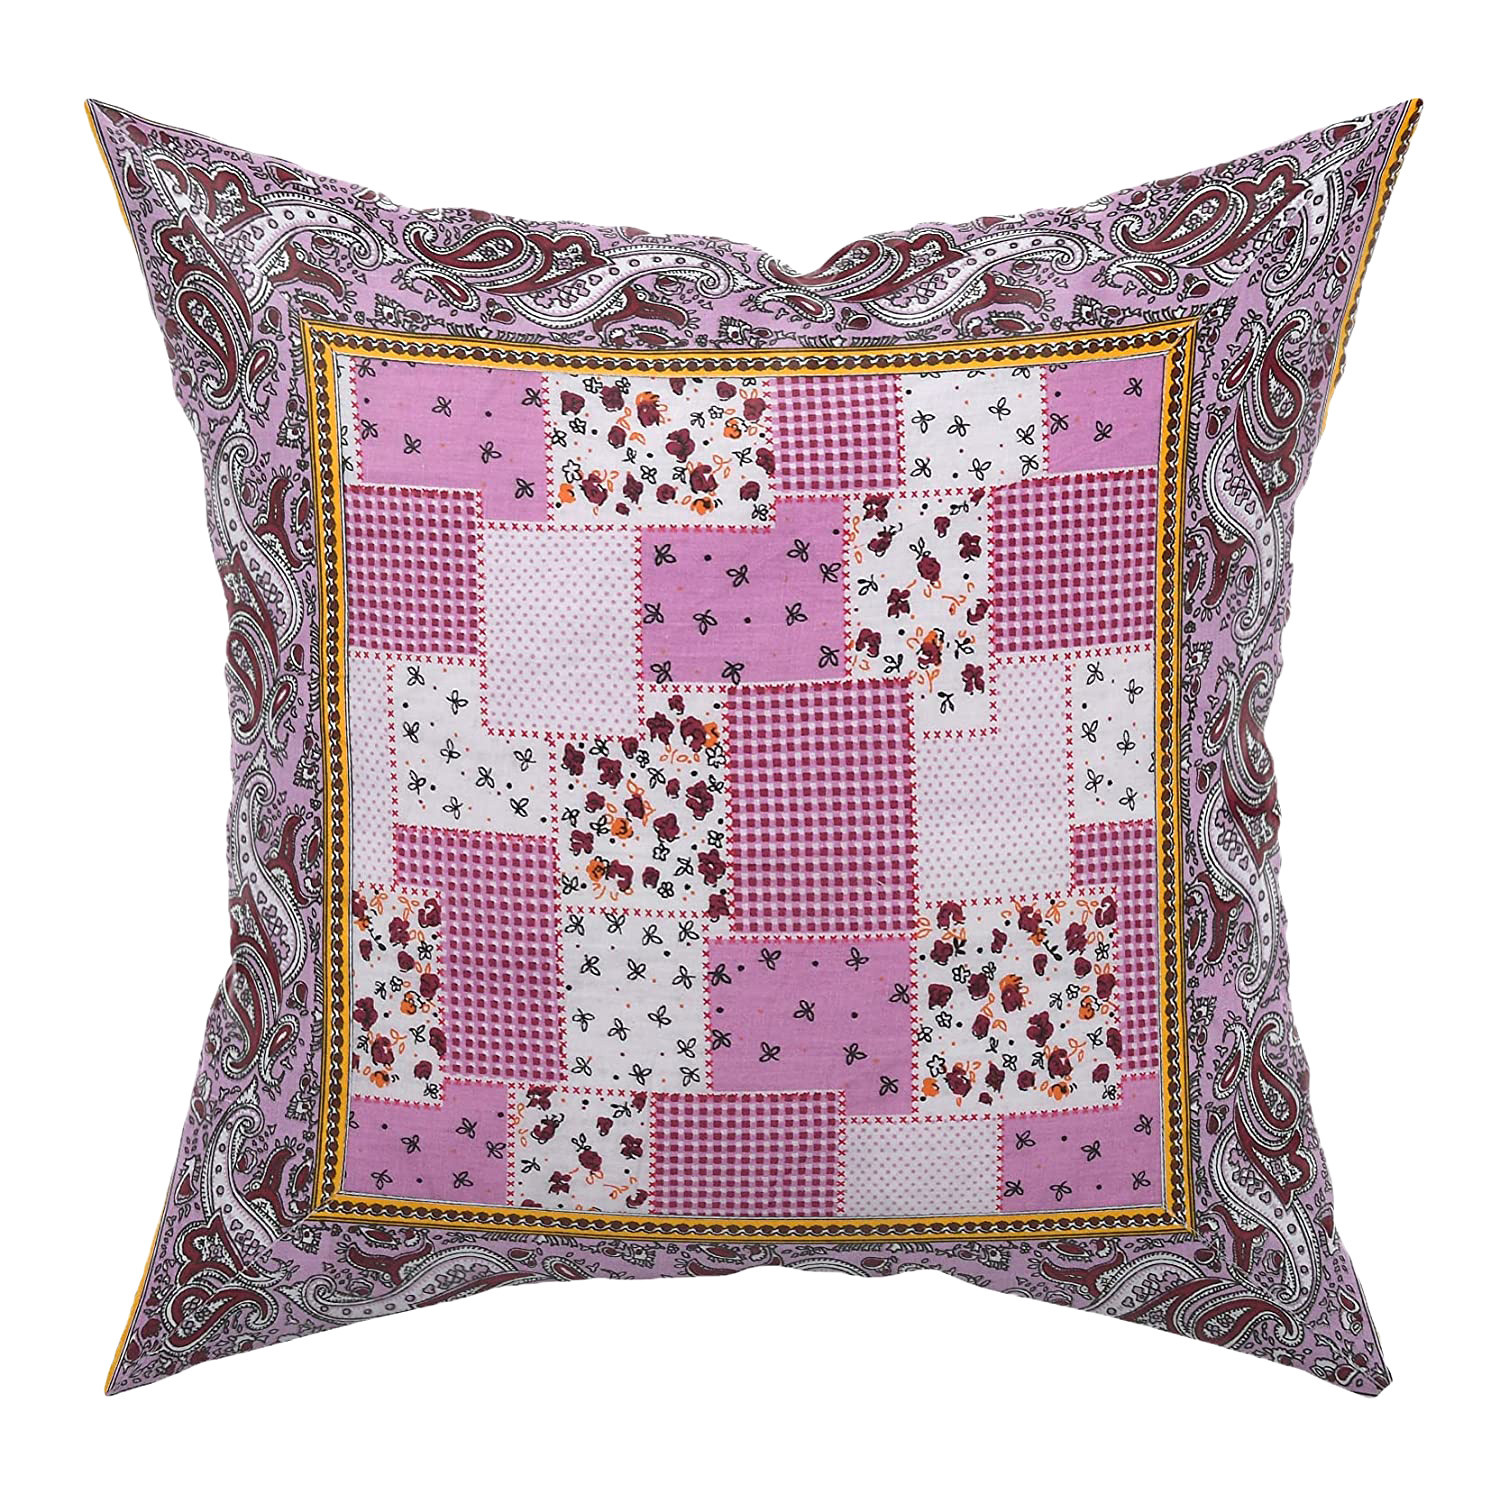 Kuber Industries Cushion Cover|Ractangle Cushion Covers|Sofa Cushion Covers|Cushion Covers 16 inch x 16 inch|Cushion Cover Set of 5|PINK